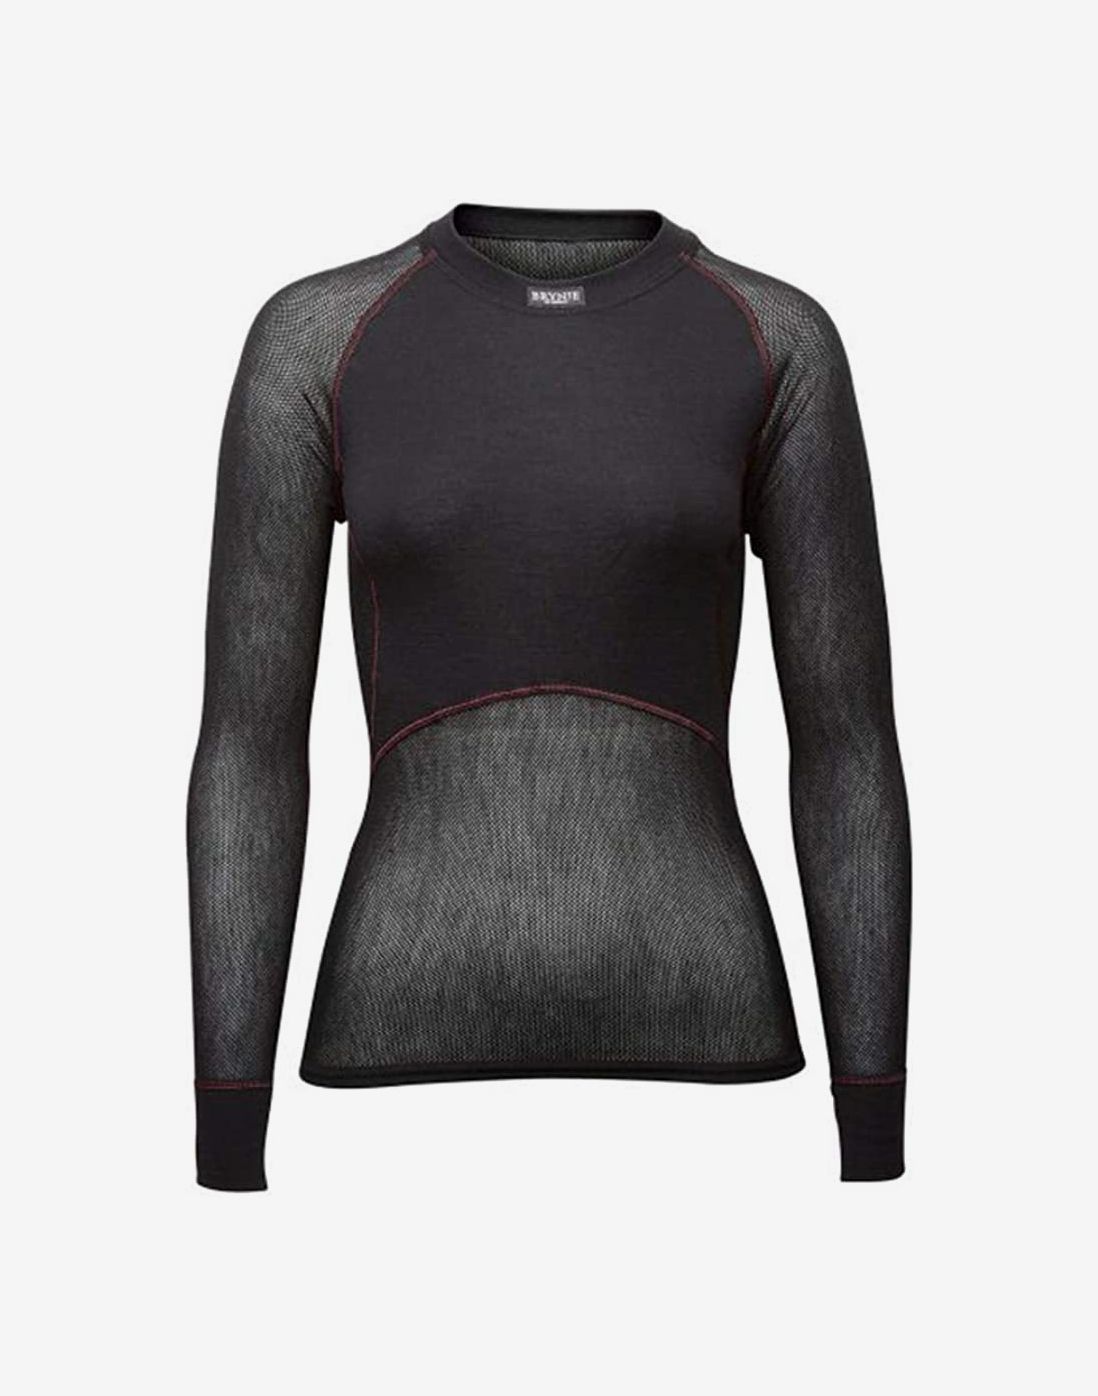 Brynje Wool Thermo Fishnet Mesh Base Layers Review 2020